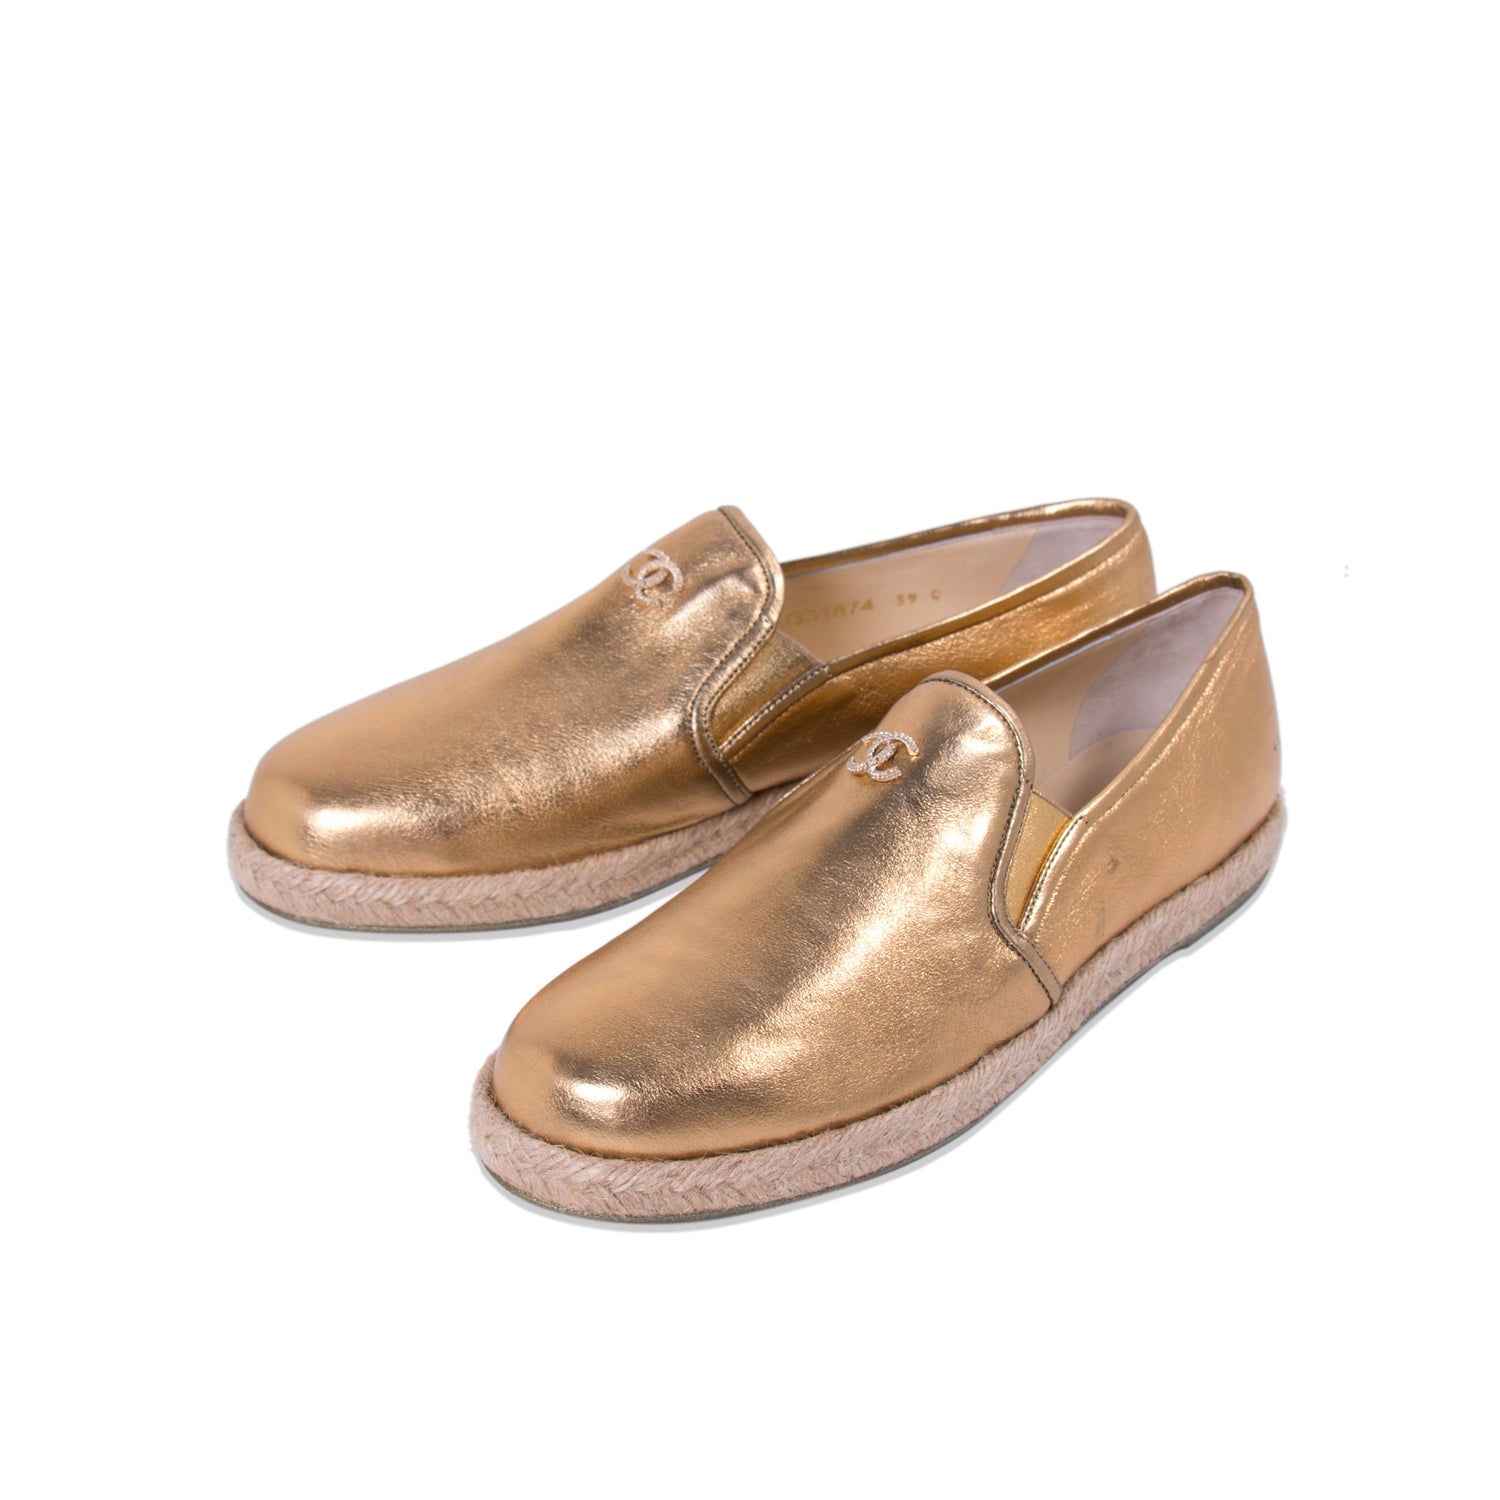 Laminated Lambskin Quilted Elastic CC Moccasin Loafers